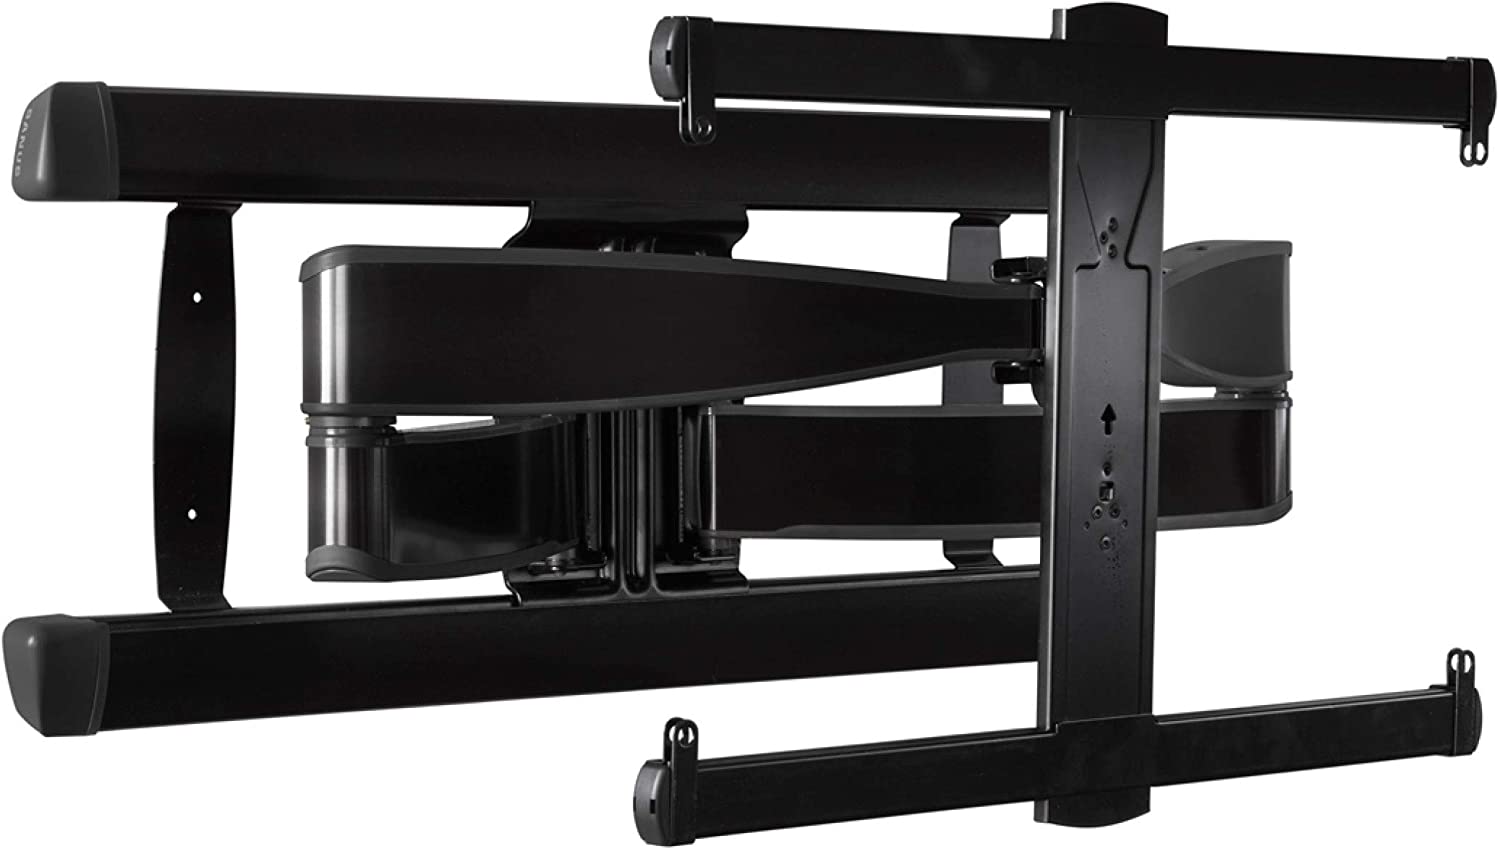 Sanus Premium Full Motion TV Wall Mount for TVs Up to 90" - Brushed Black Finish with FluidMotion™ Design for Smooth Extension, Swivel & Tilt